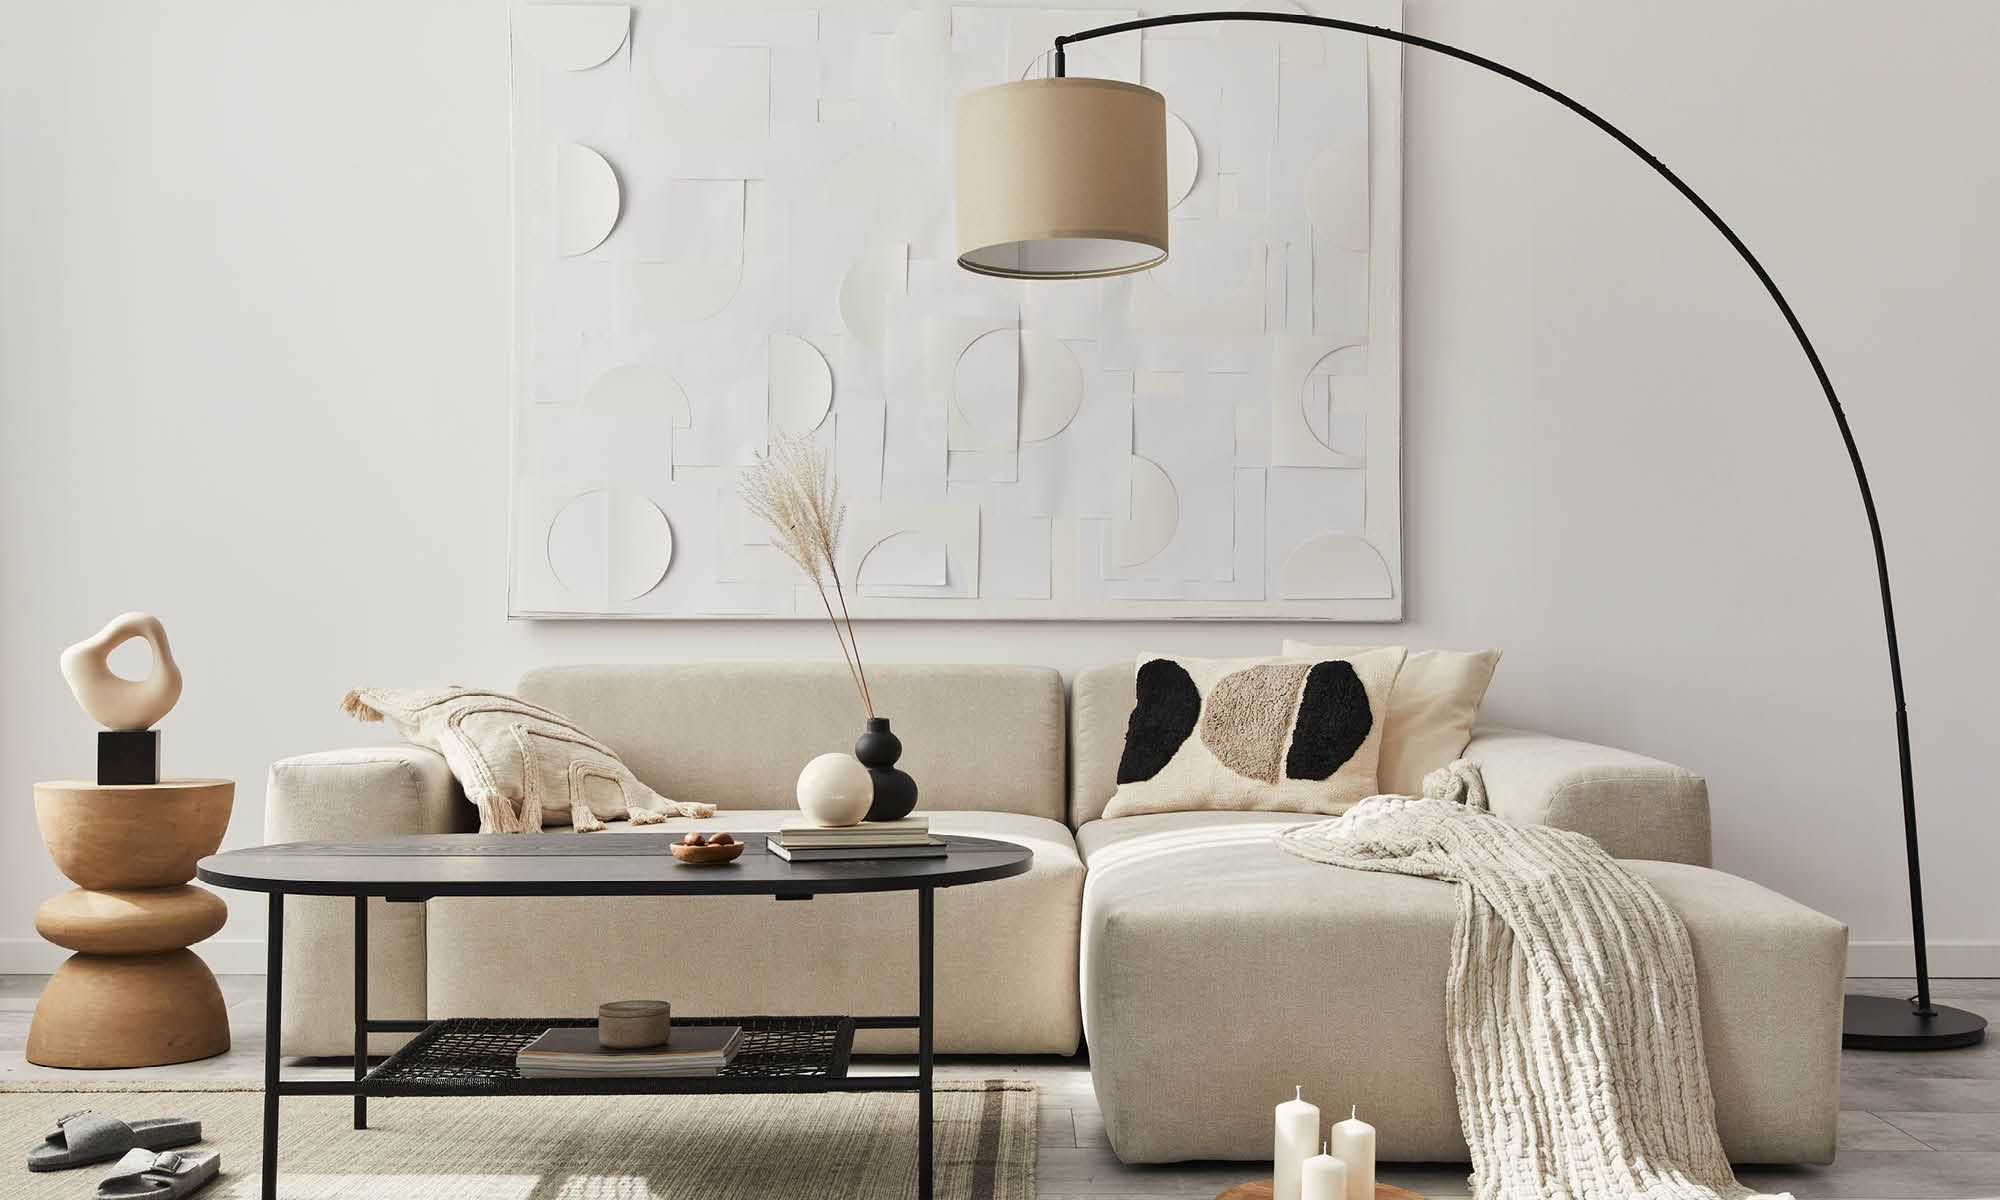 A chic living room with a beige sofa, black coffee table, artistic wall decor, and an arching floor lamp.